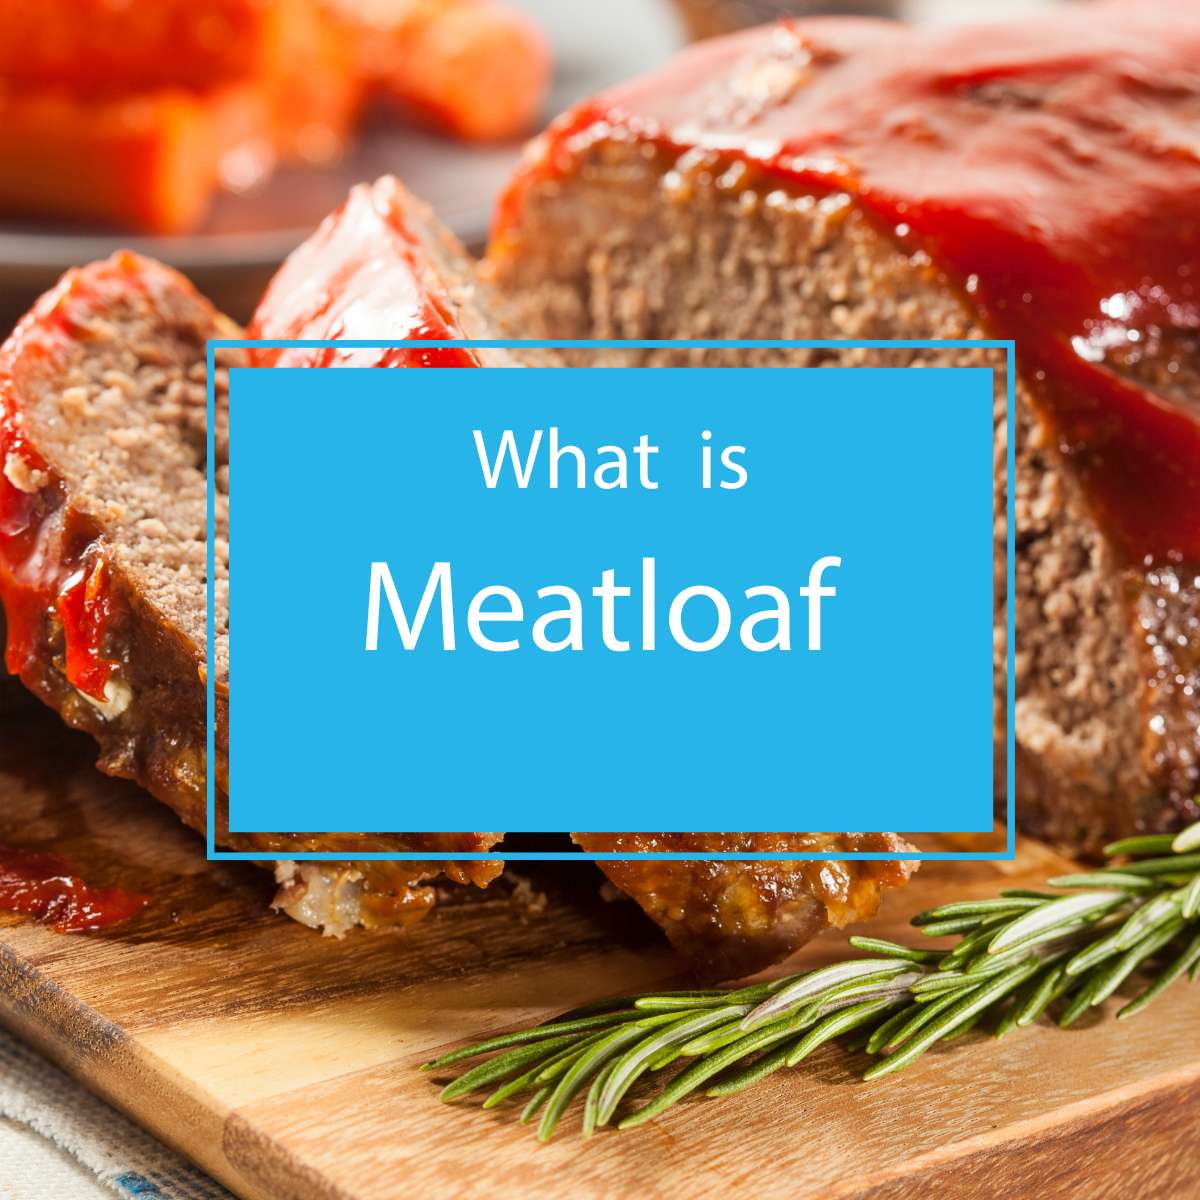 What is Meatloaf